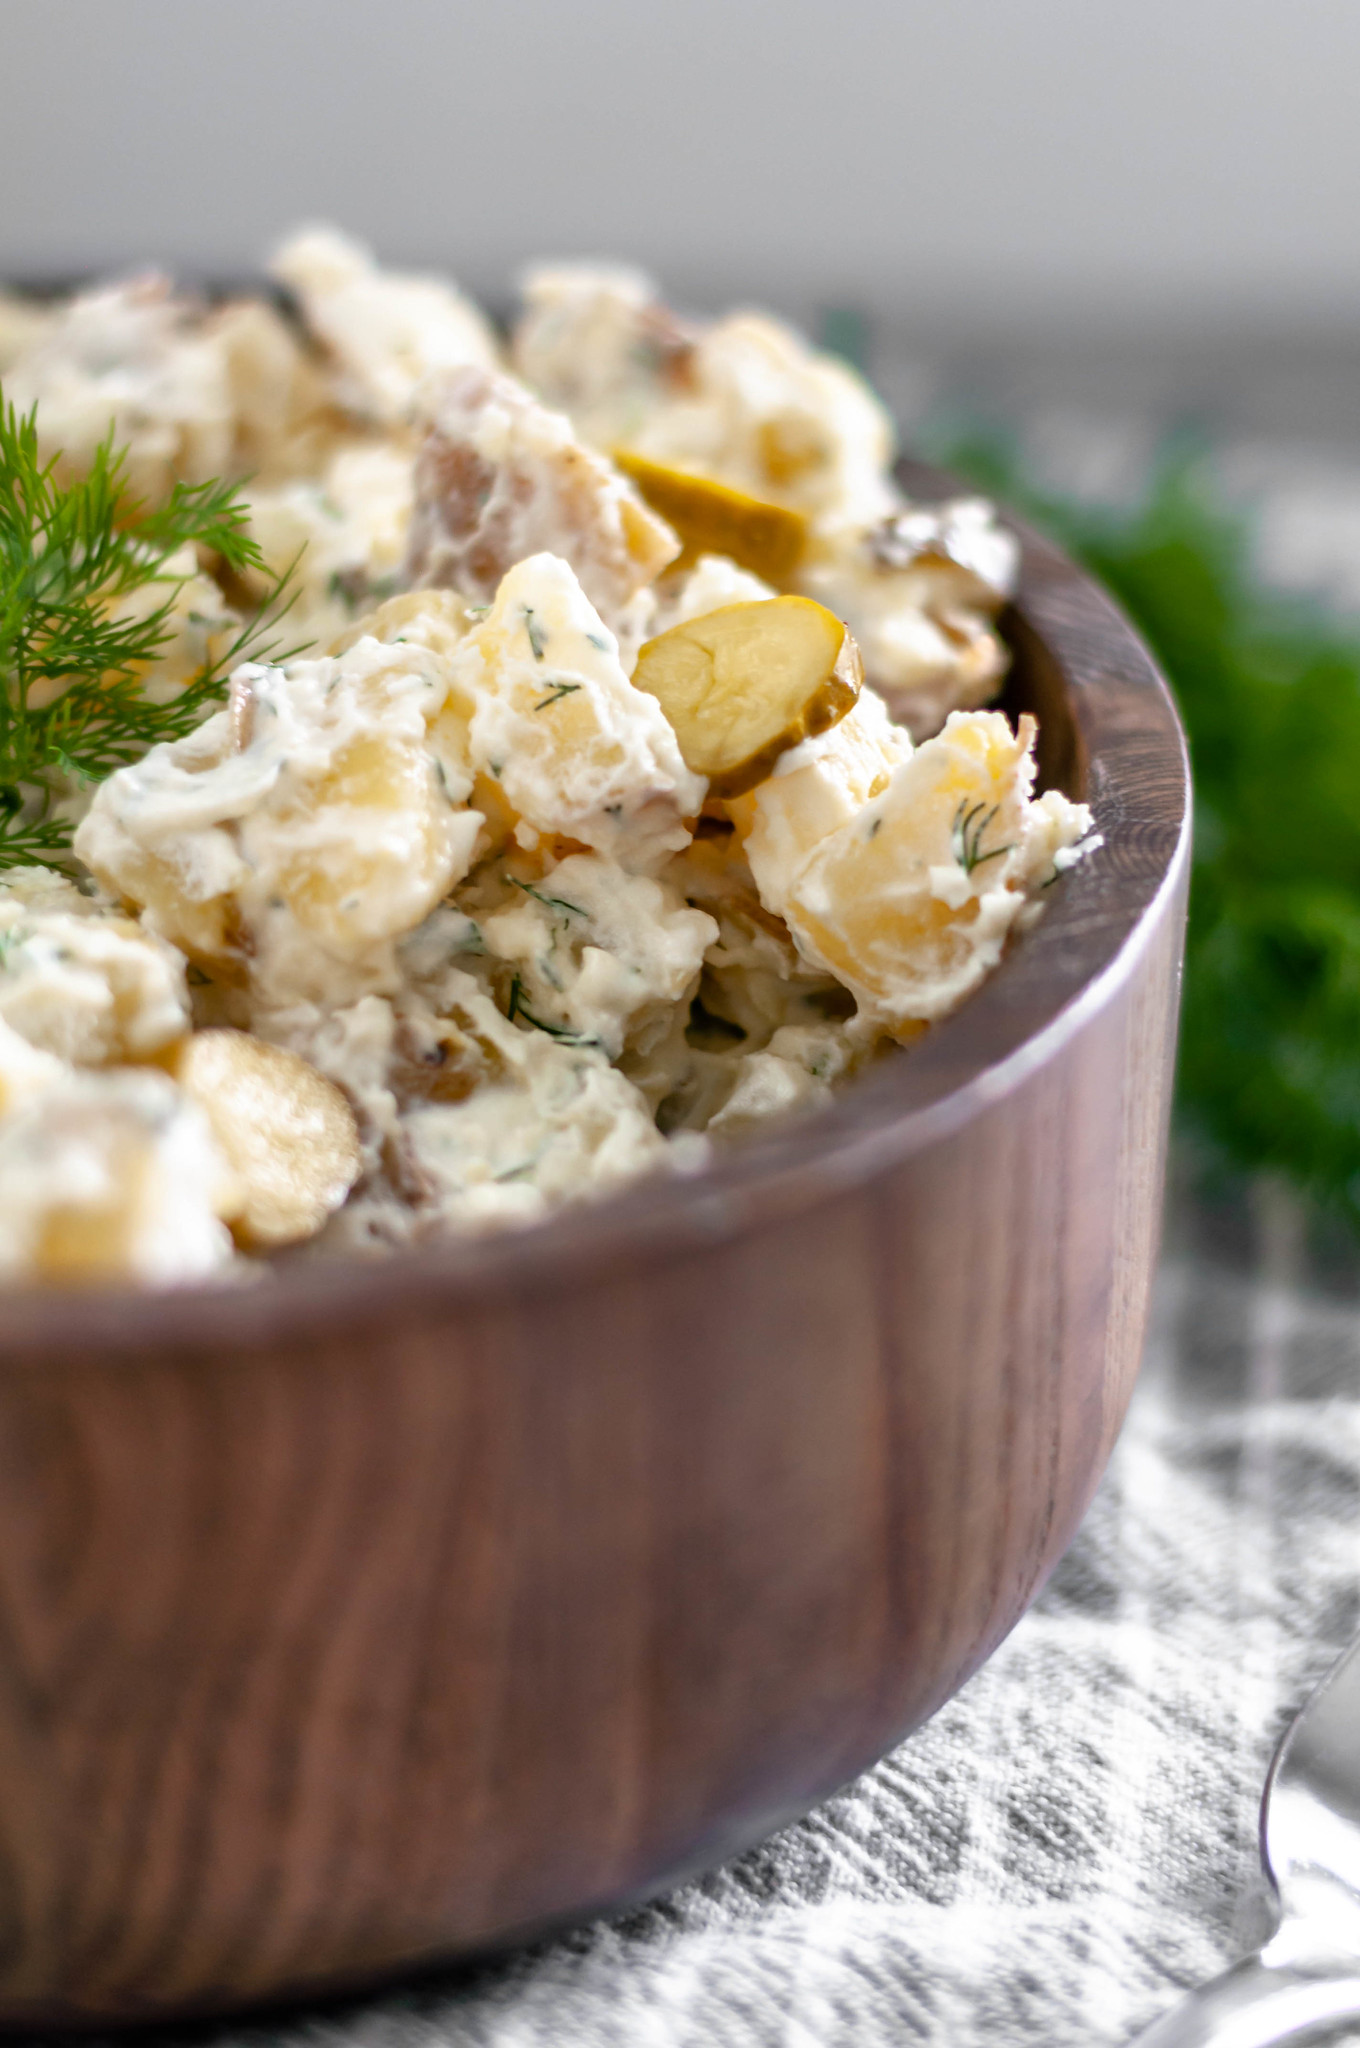 If you're a pickle lover, you need to try this Pickle Potato Salad ASAP. Tender potatoes, crunchy pickles and a creamy dill sauce.